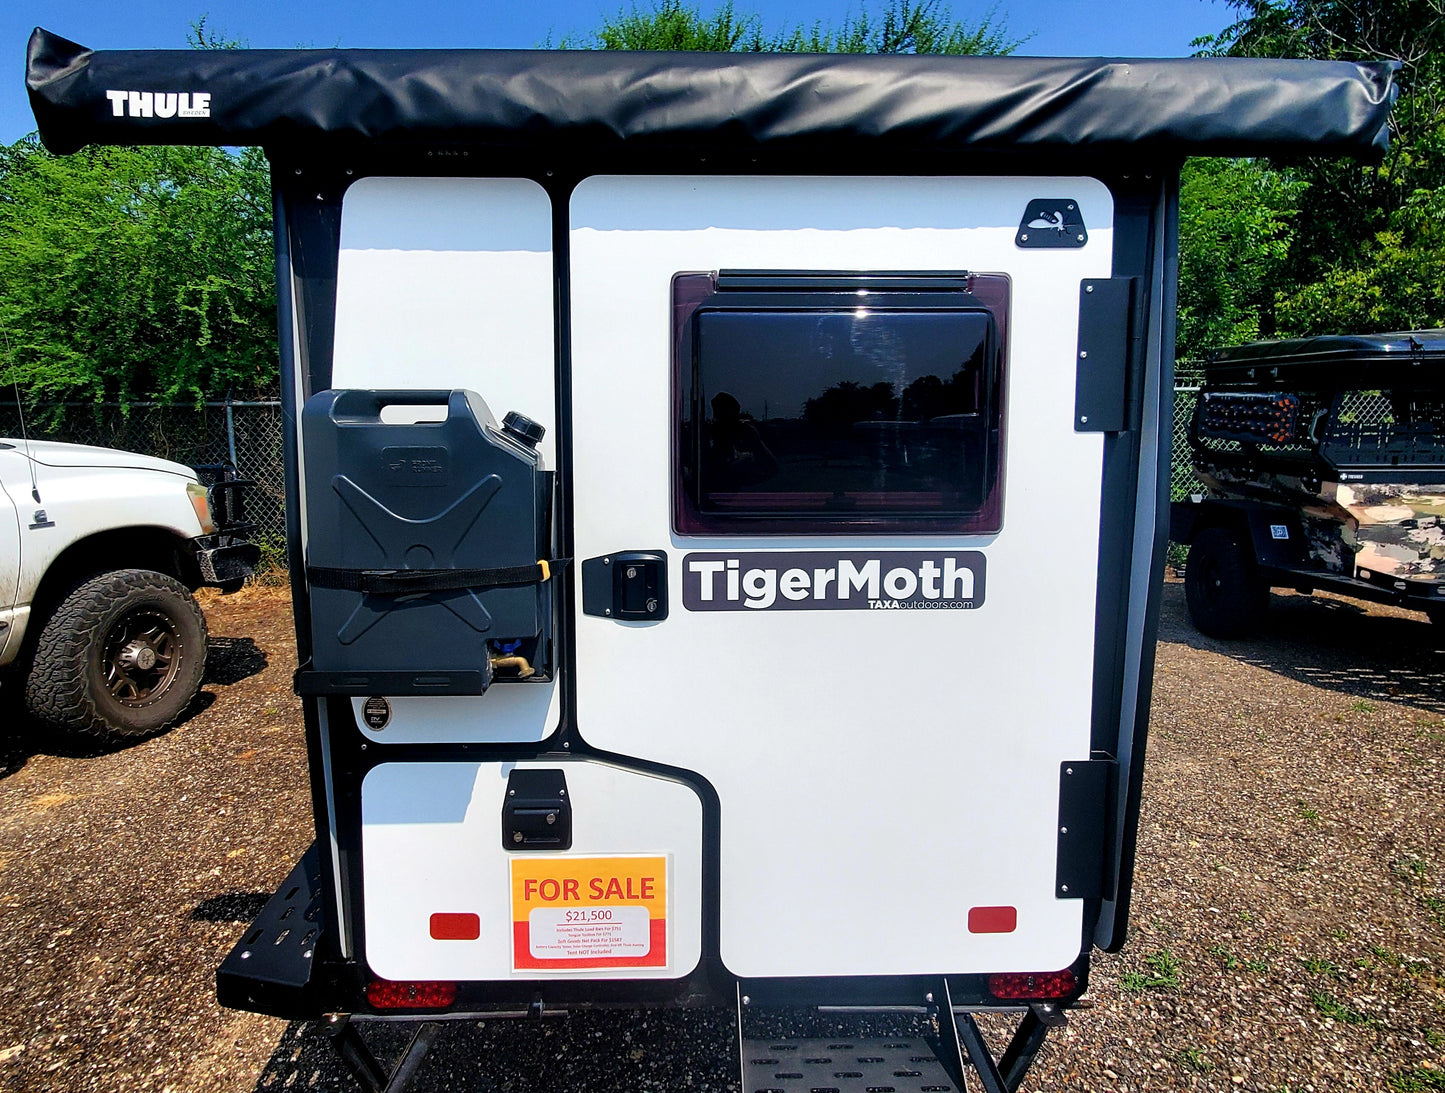 taxa outdoors standard tigermoth air condition offroad sleep inside trailer for sale near austin bastrop texas at hawkes outdoors 2102512882